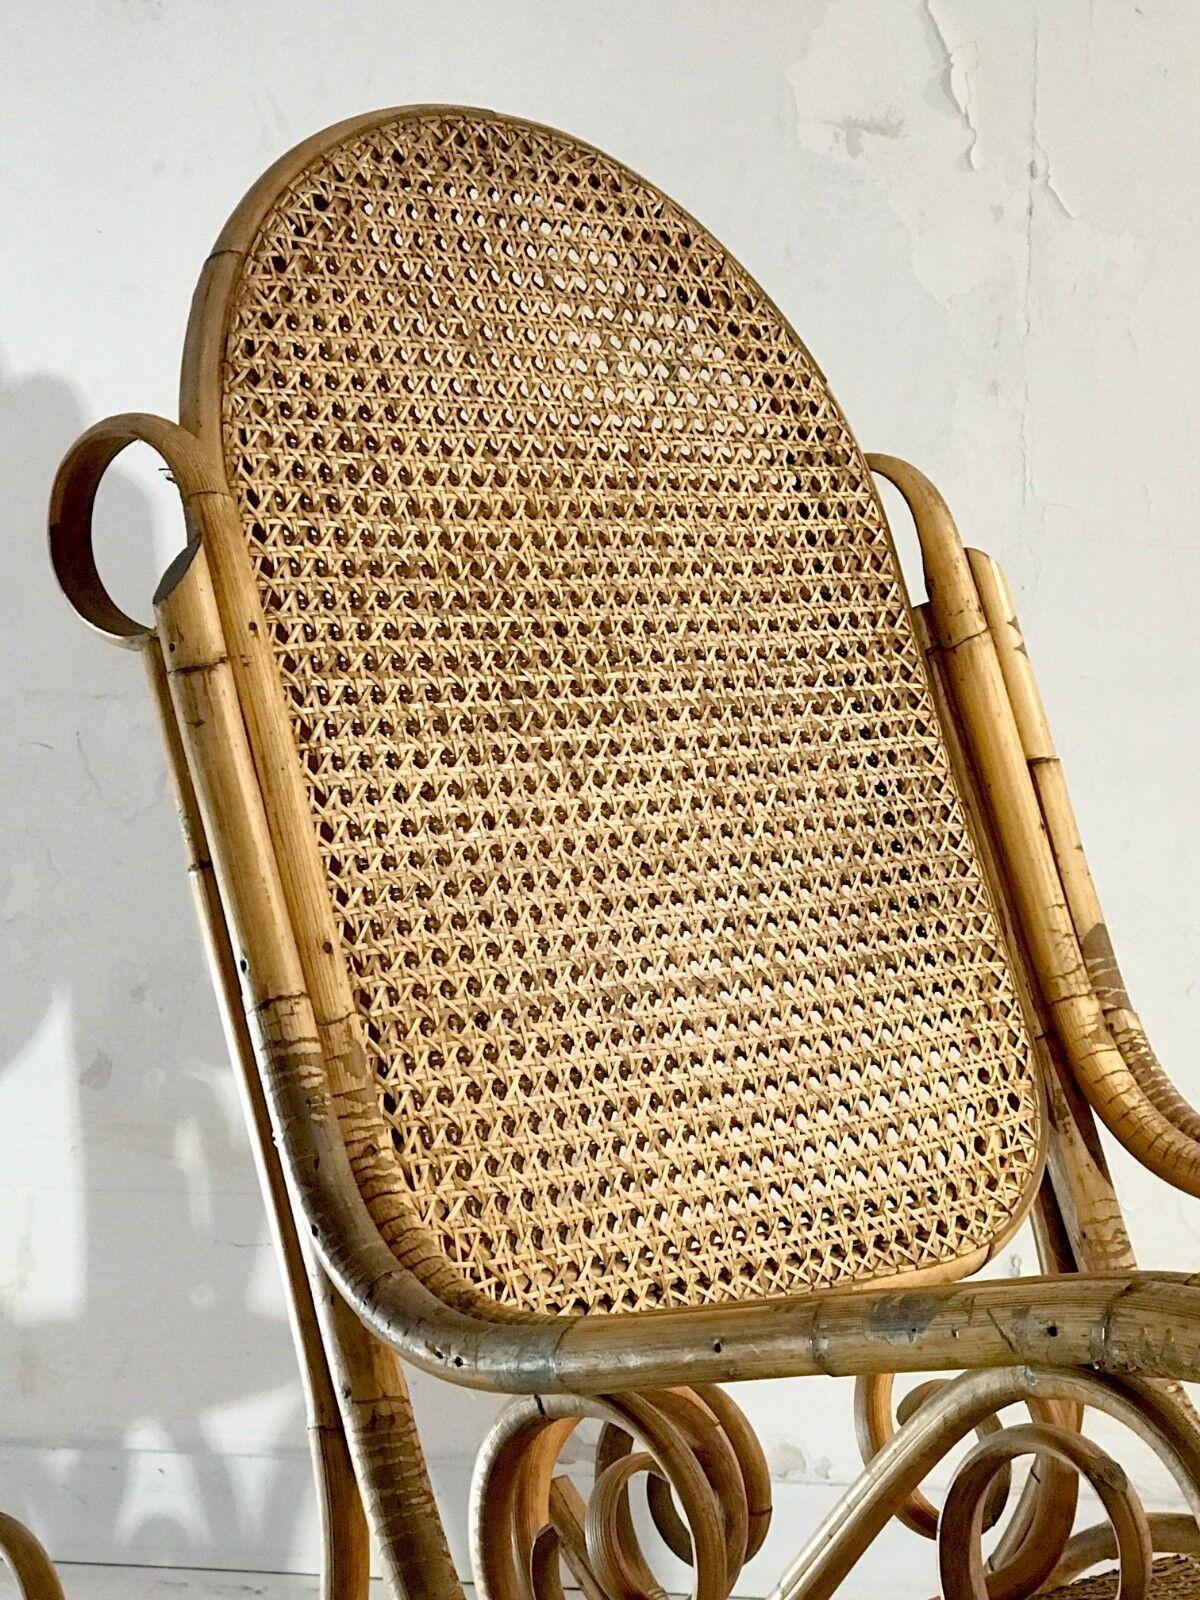 An Early MODERN NEO-CLASSICAL FREE-FORM ROCKING-CHAIR by THONET, France 1900 For Sale 2